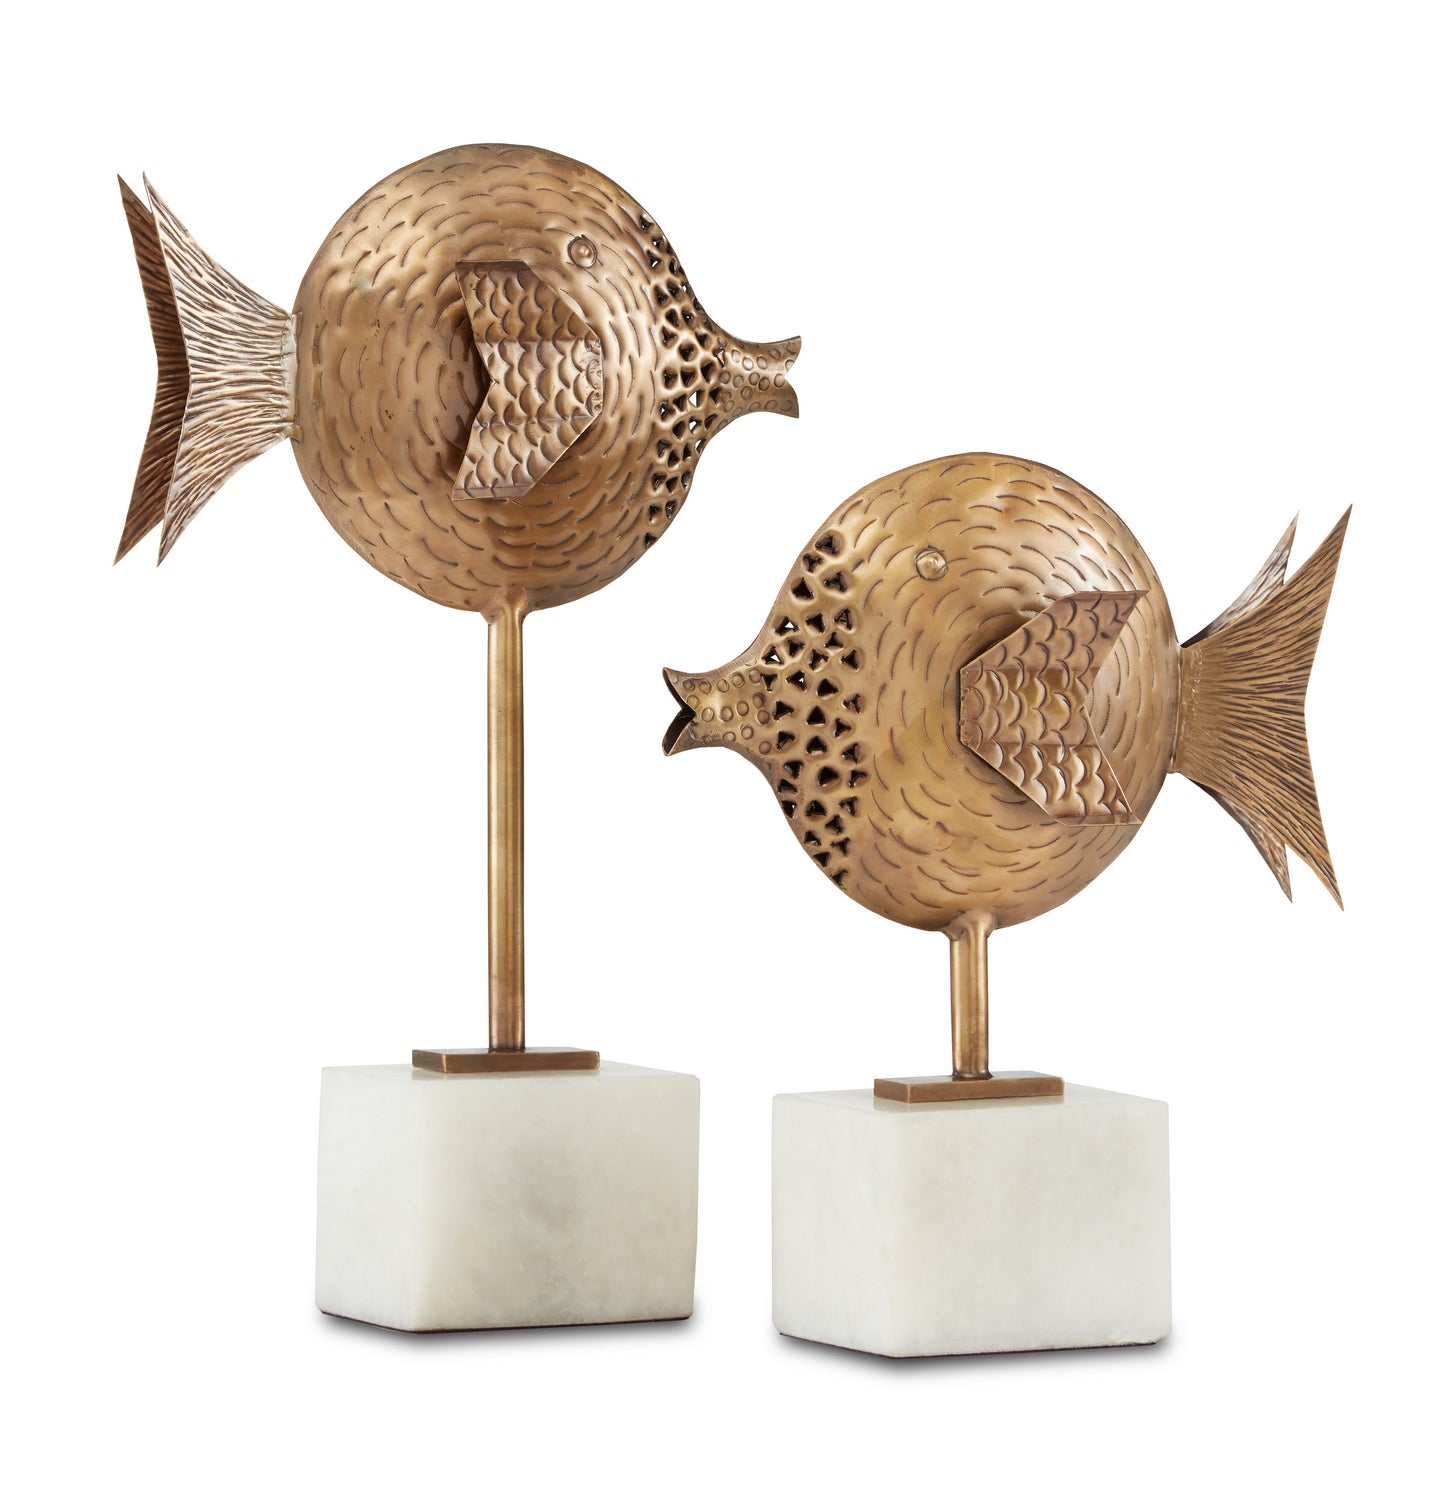 Fish Set of 2 from the Cici collection in Antique Brass/White finish